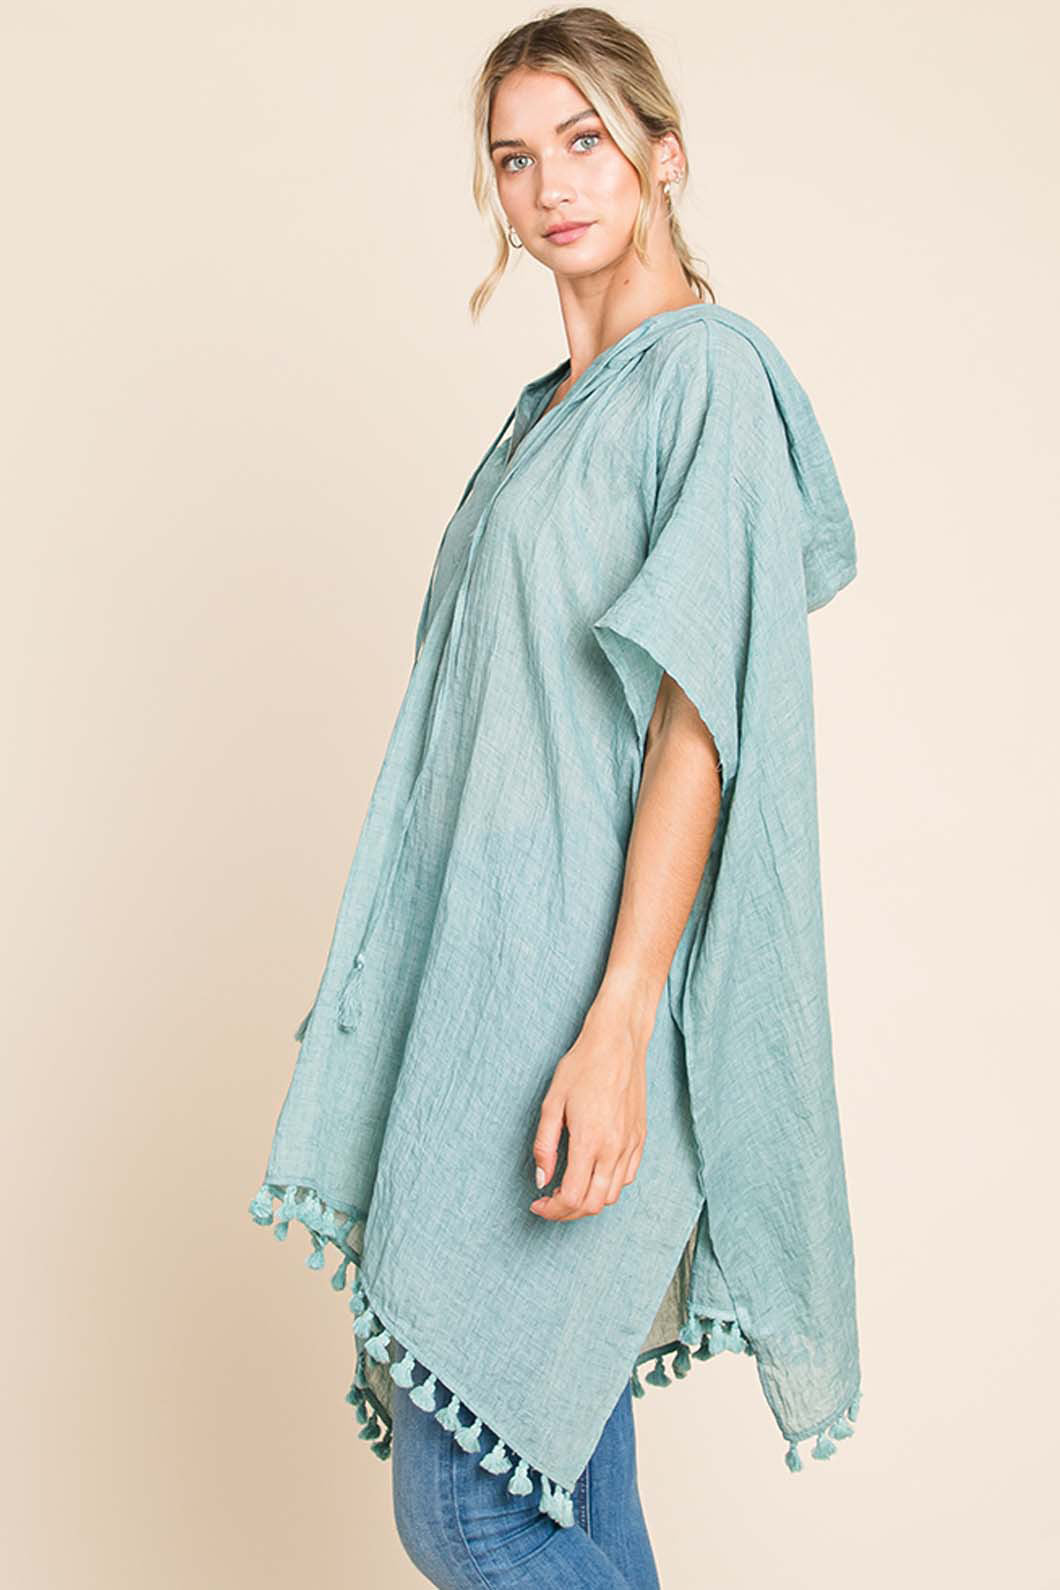 Cotton Bleu by Nu Label Tassel Hem Hooded Cover Up - Three Bears Boutique